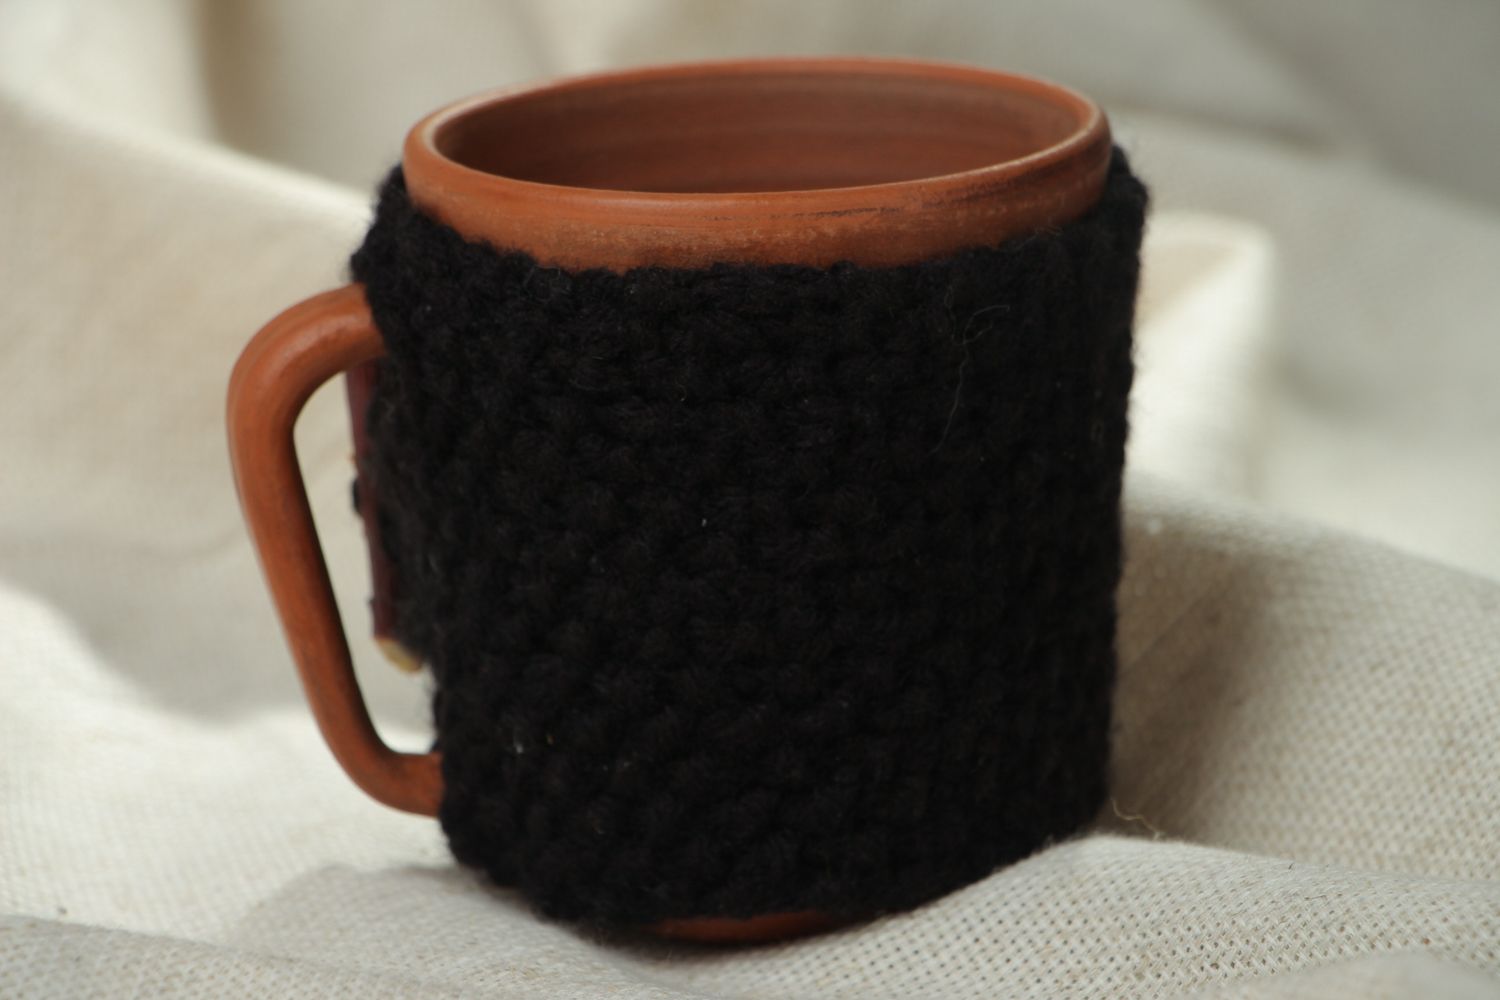 10 oz clay terracotta color cup with handle and black knitted cover photo 5